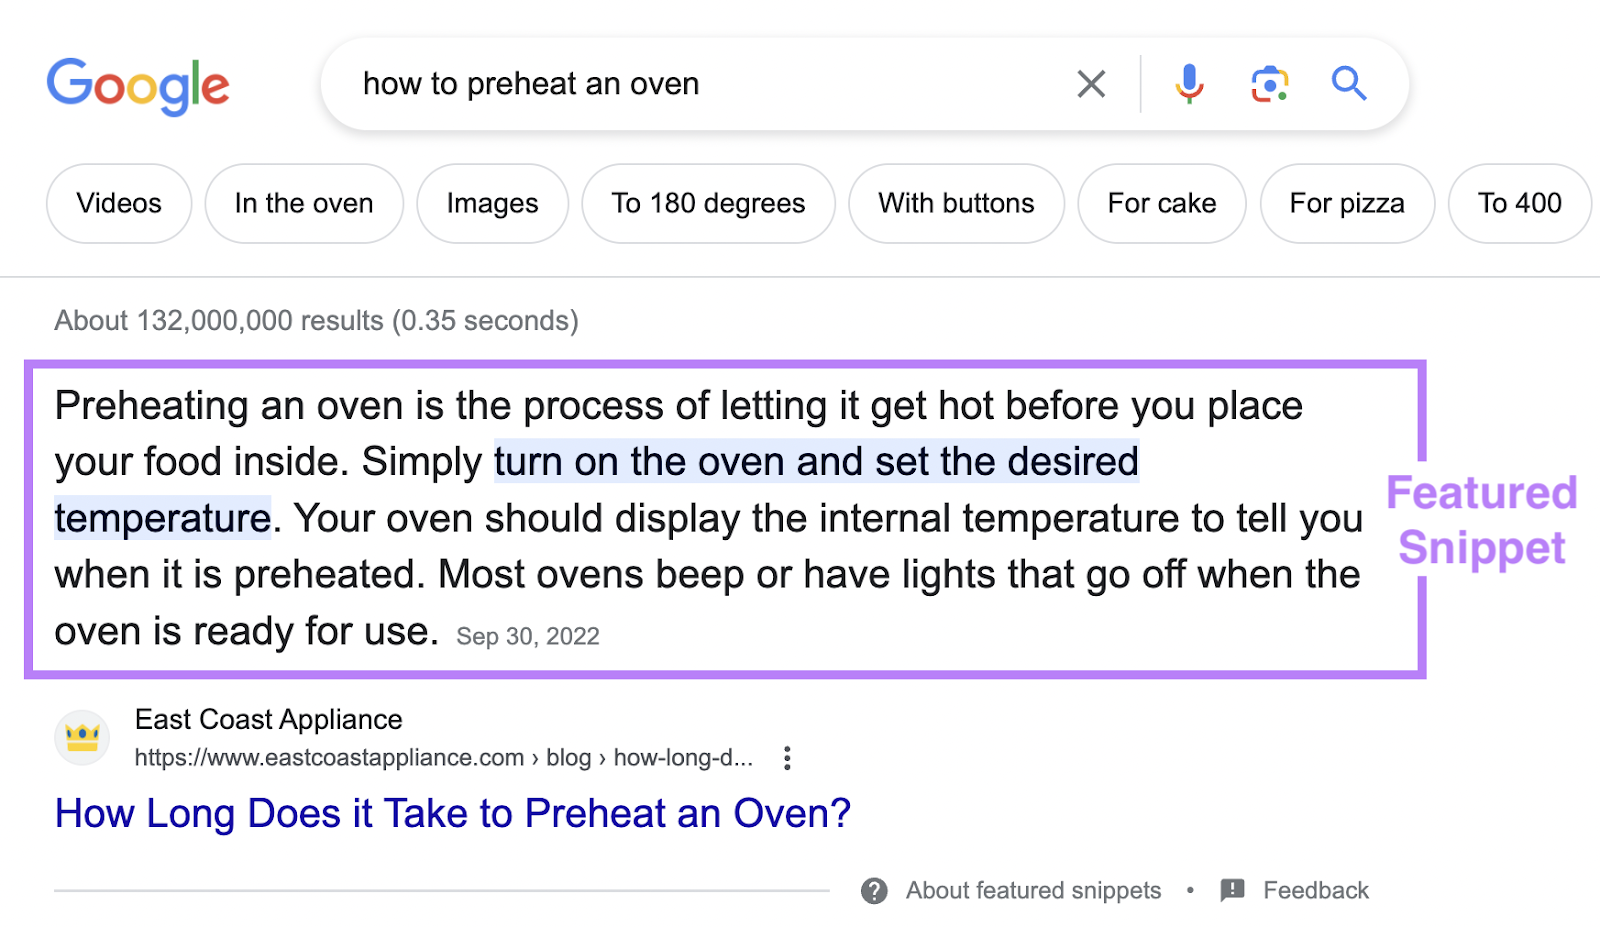 An example of a featured snippet result for "how to preheat an oven" search